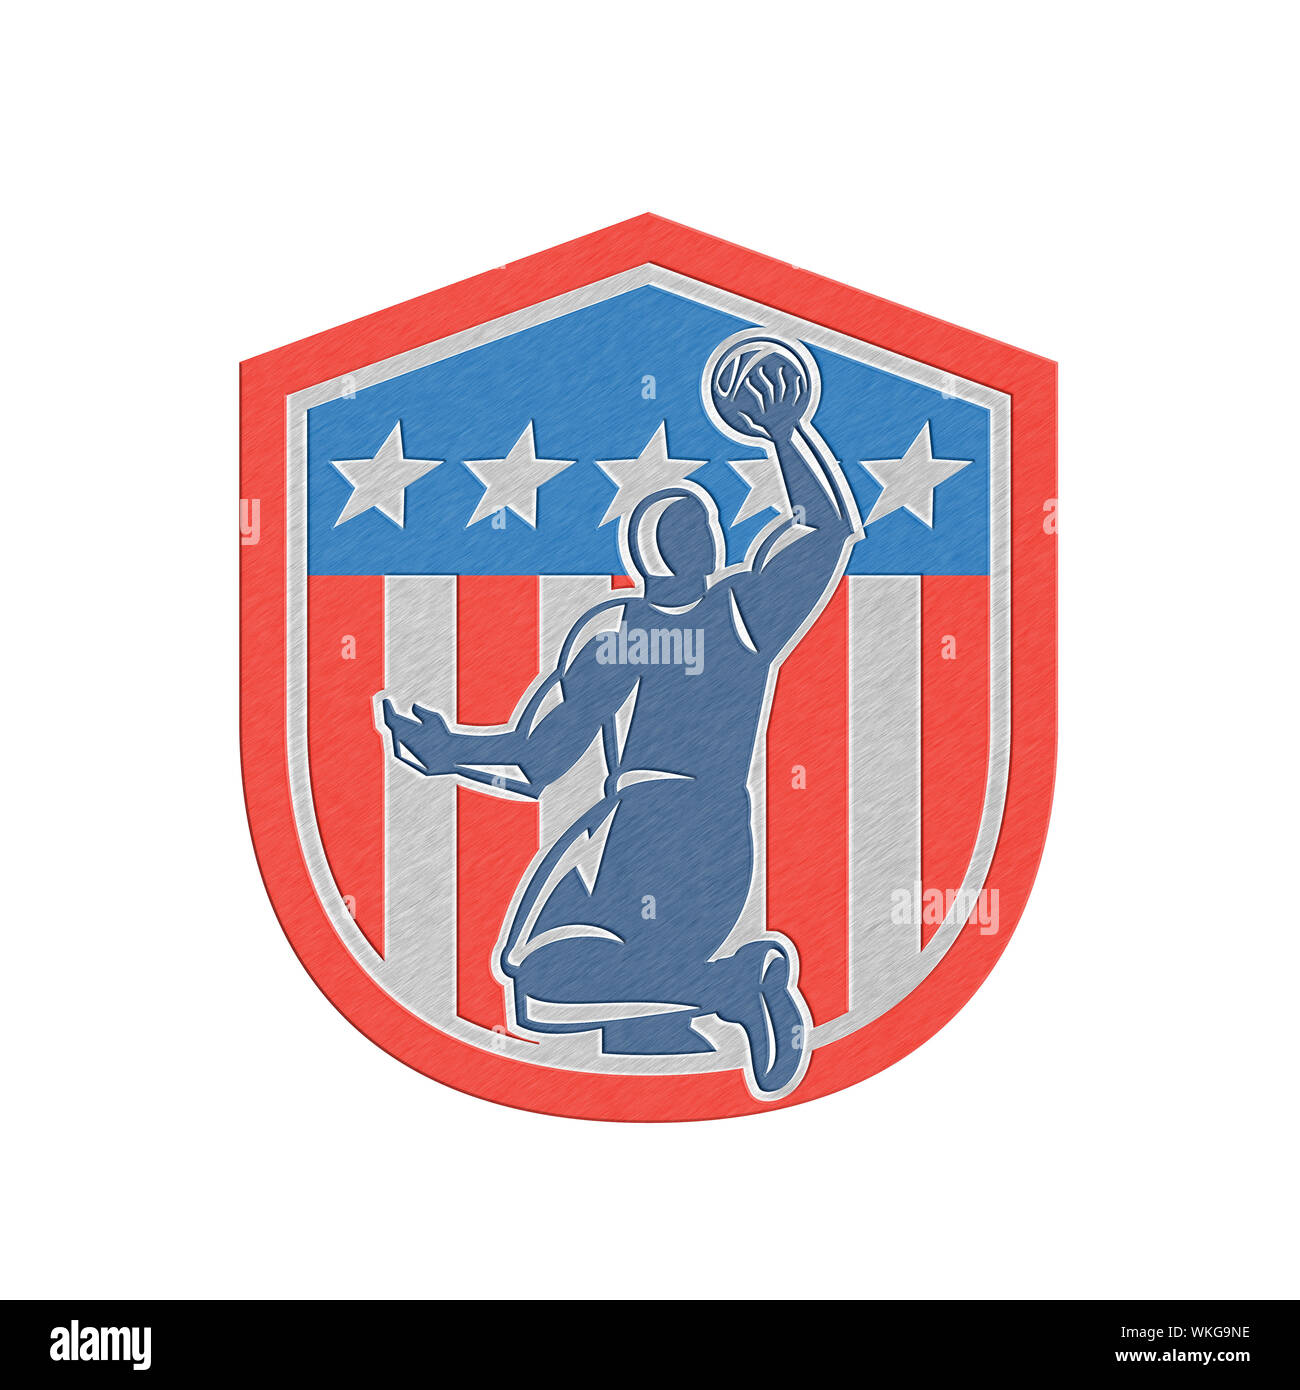 Metallic styled illustration of a basketball player dunking rebounding ball viewed from the rear set inside American stars and stripes flag shield cre Stock Photo